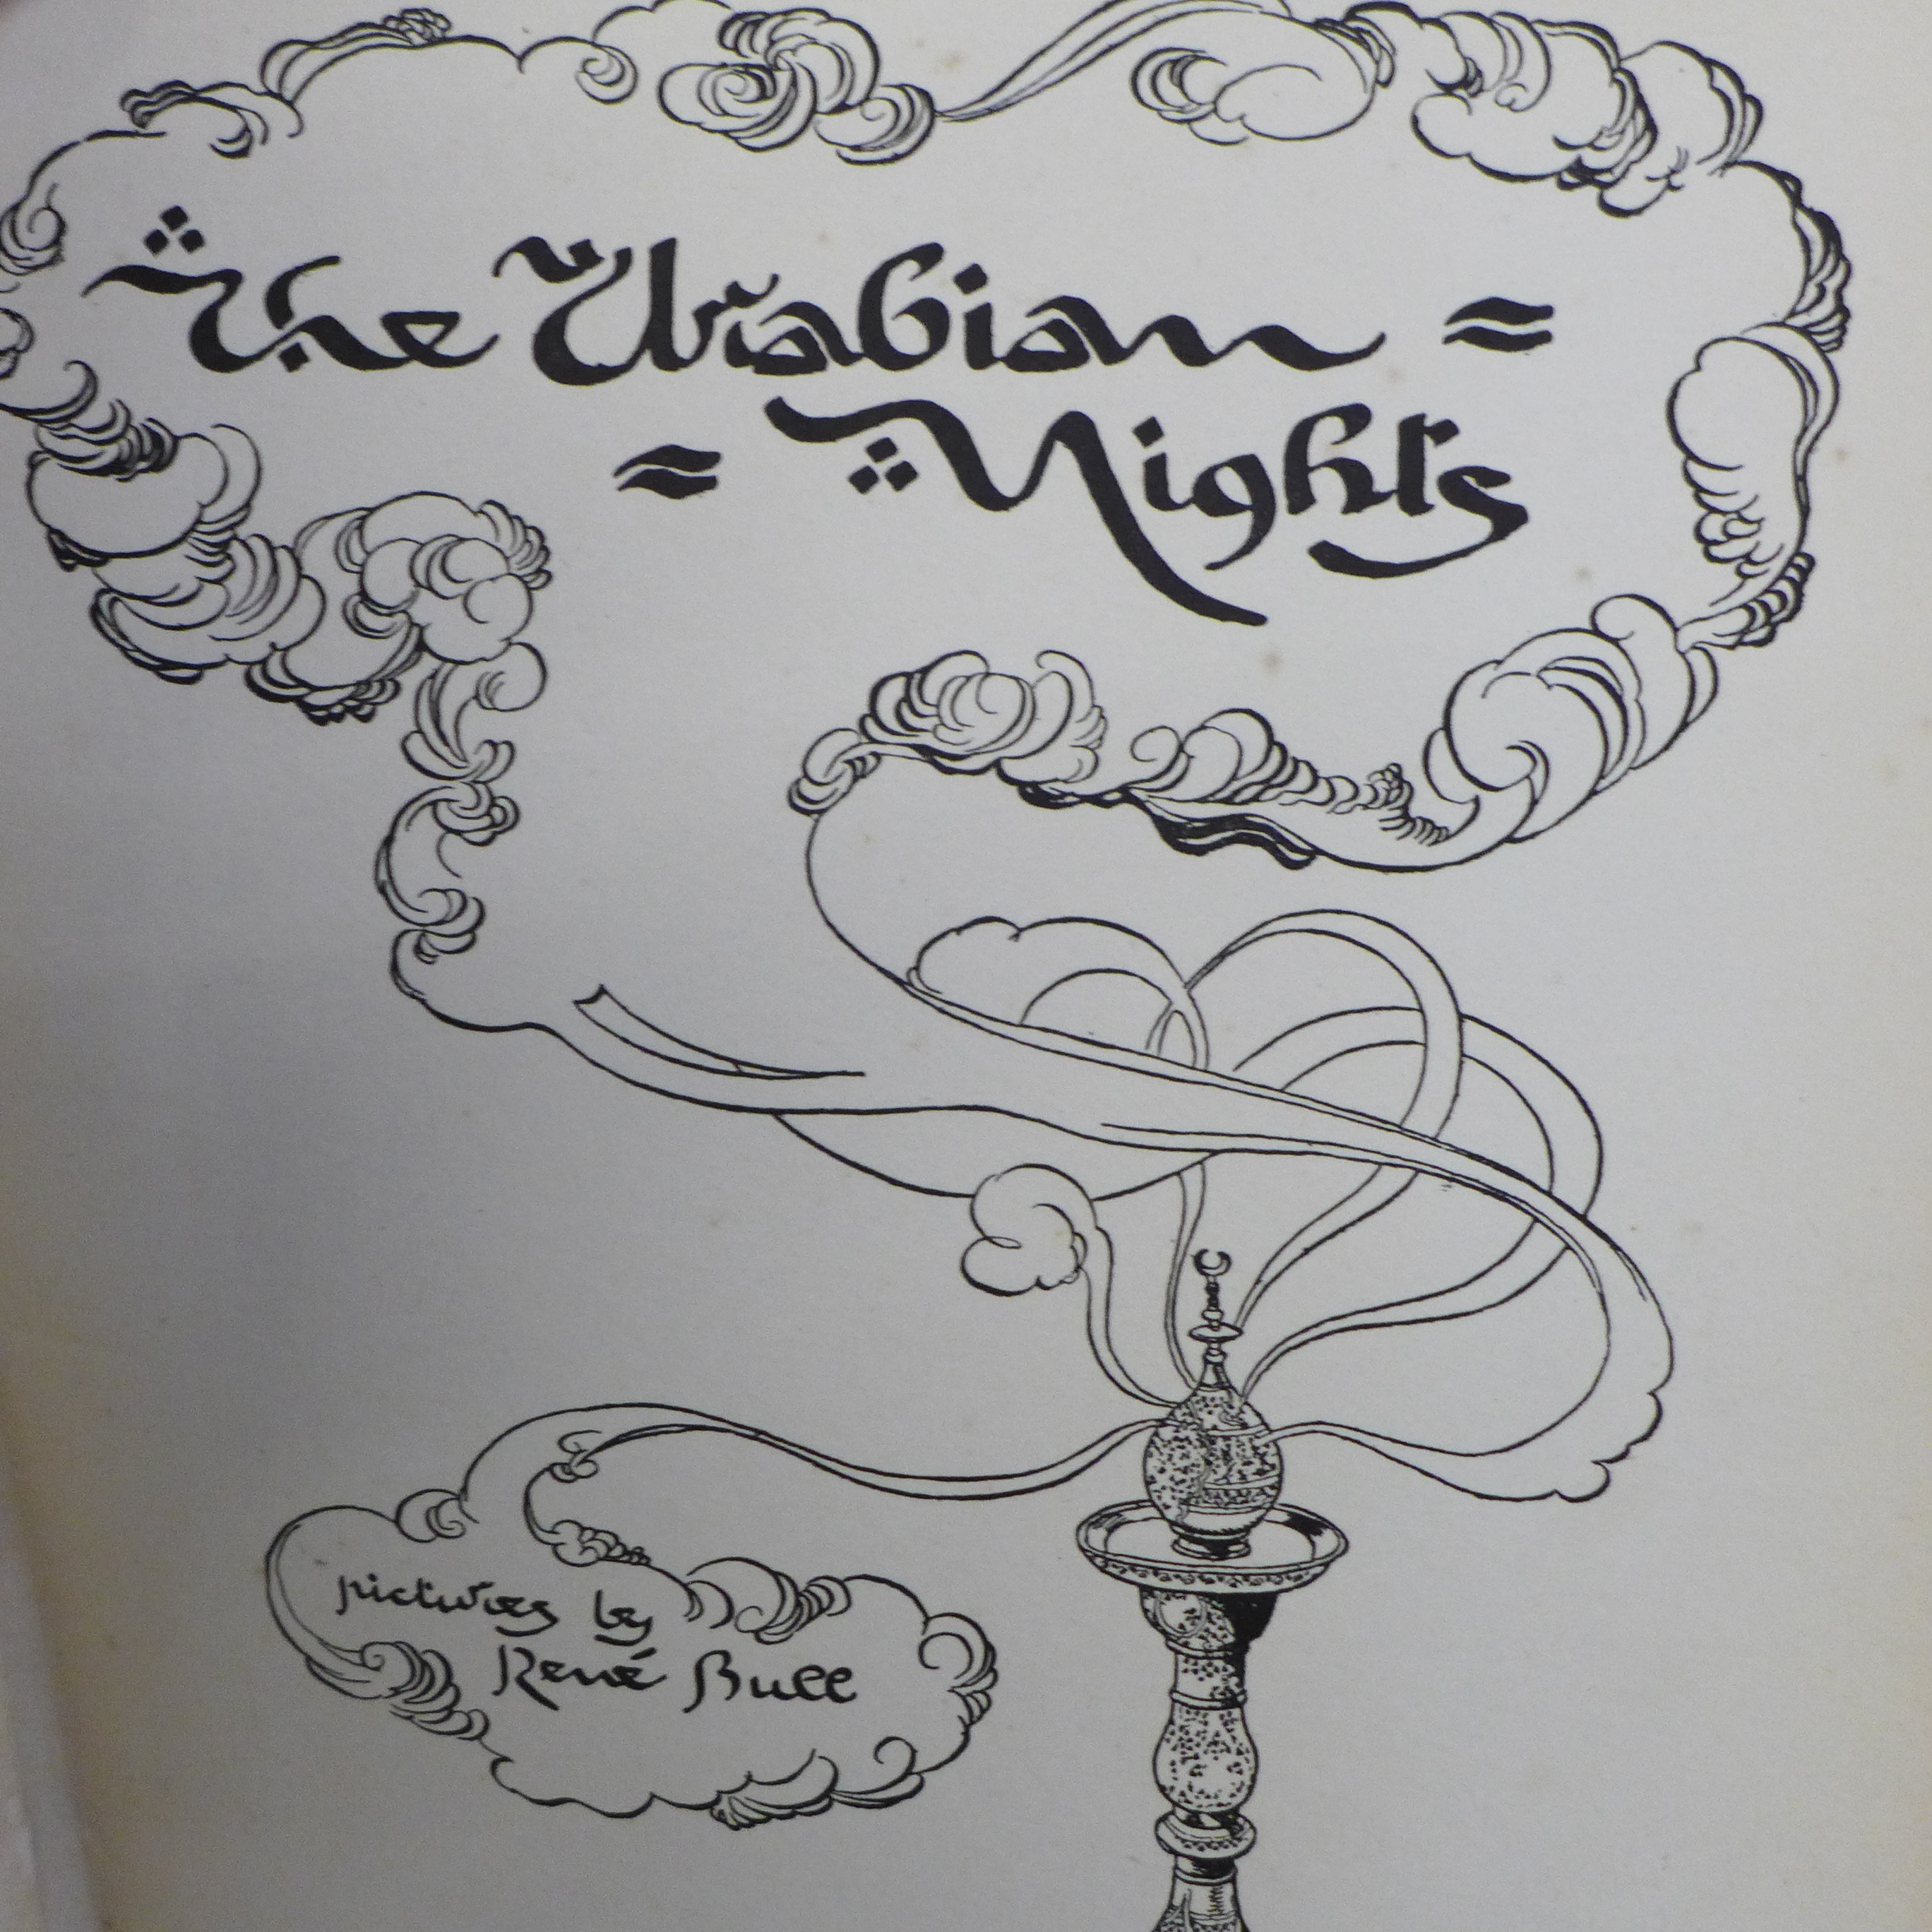 An Arabian Nights book with illustrations by Rene Bull, London, Constable & Co. Ltd. 1912, spine a/f - Image 2 of 9